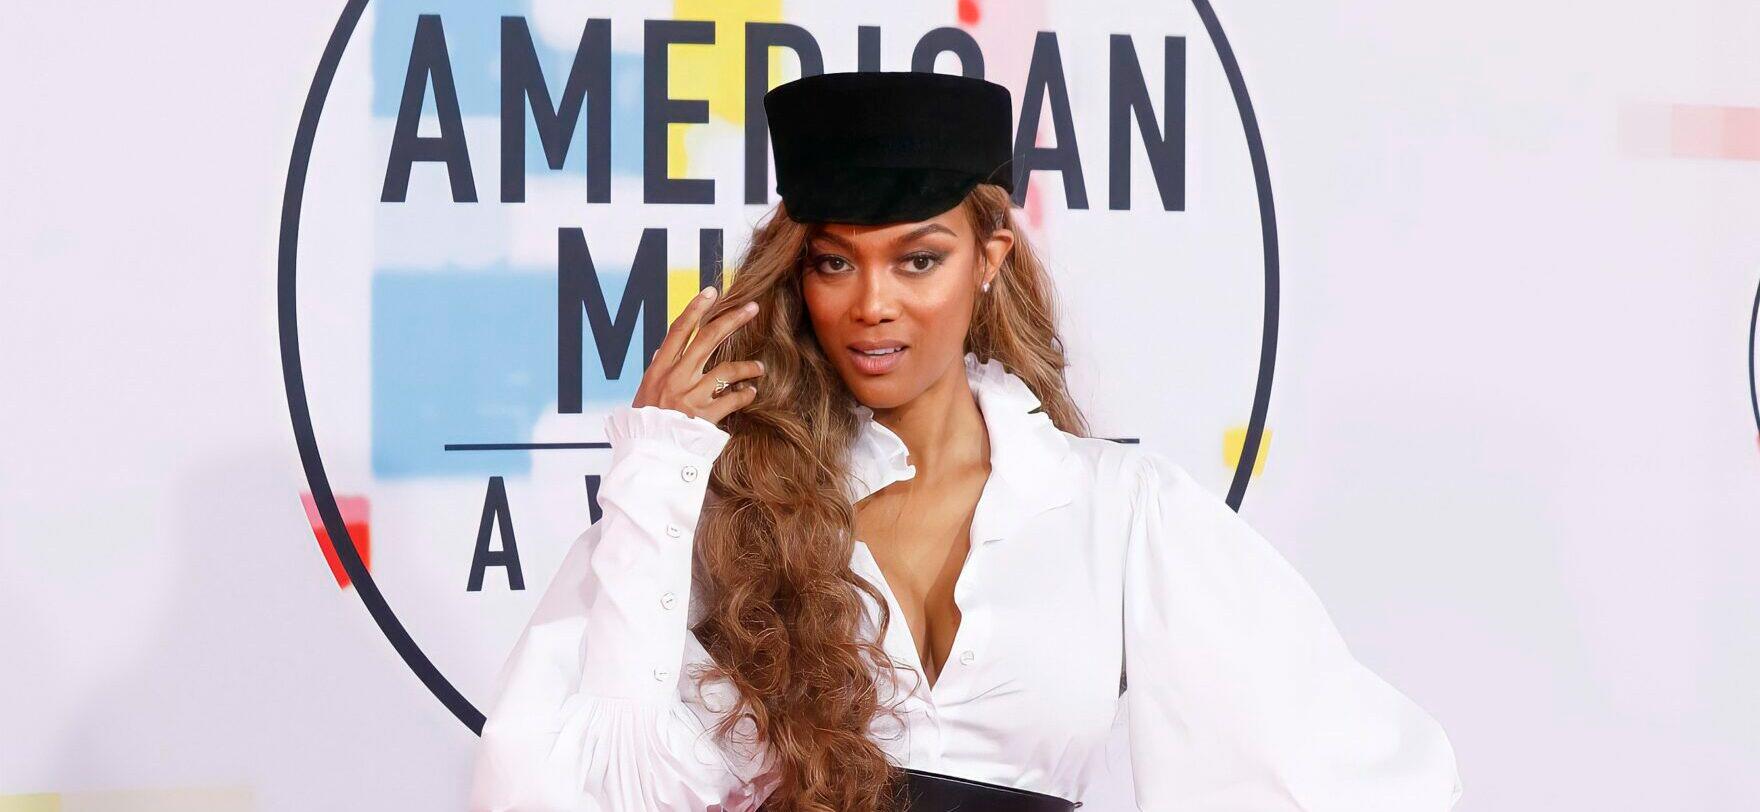 Tyra Banks Confirms She Is Quitting ‘Dancing With the Stars’